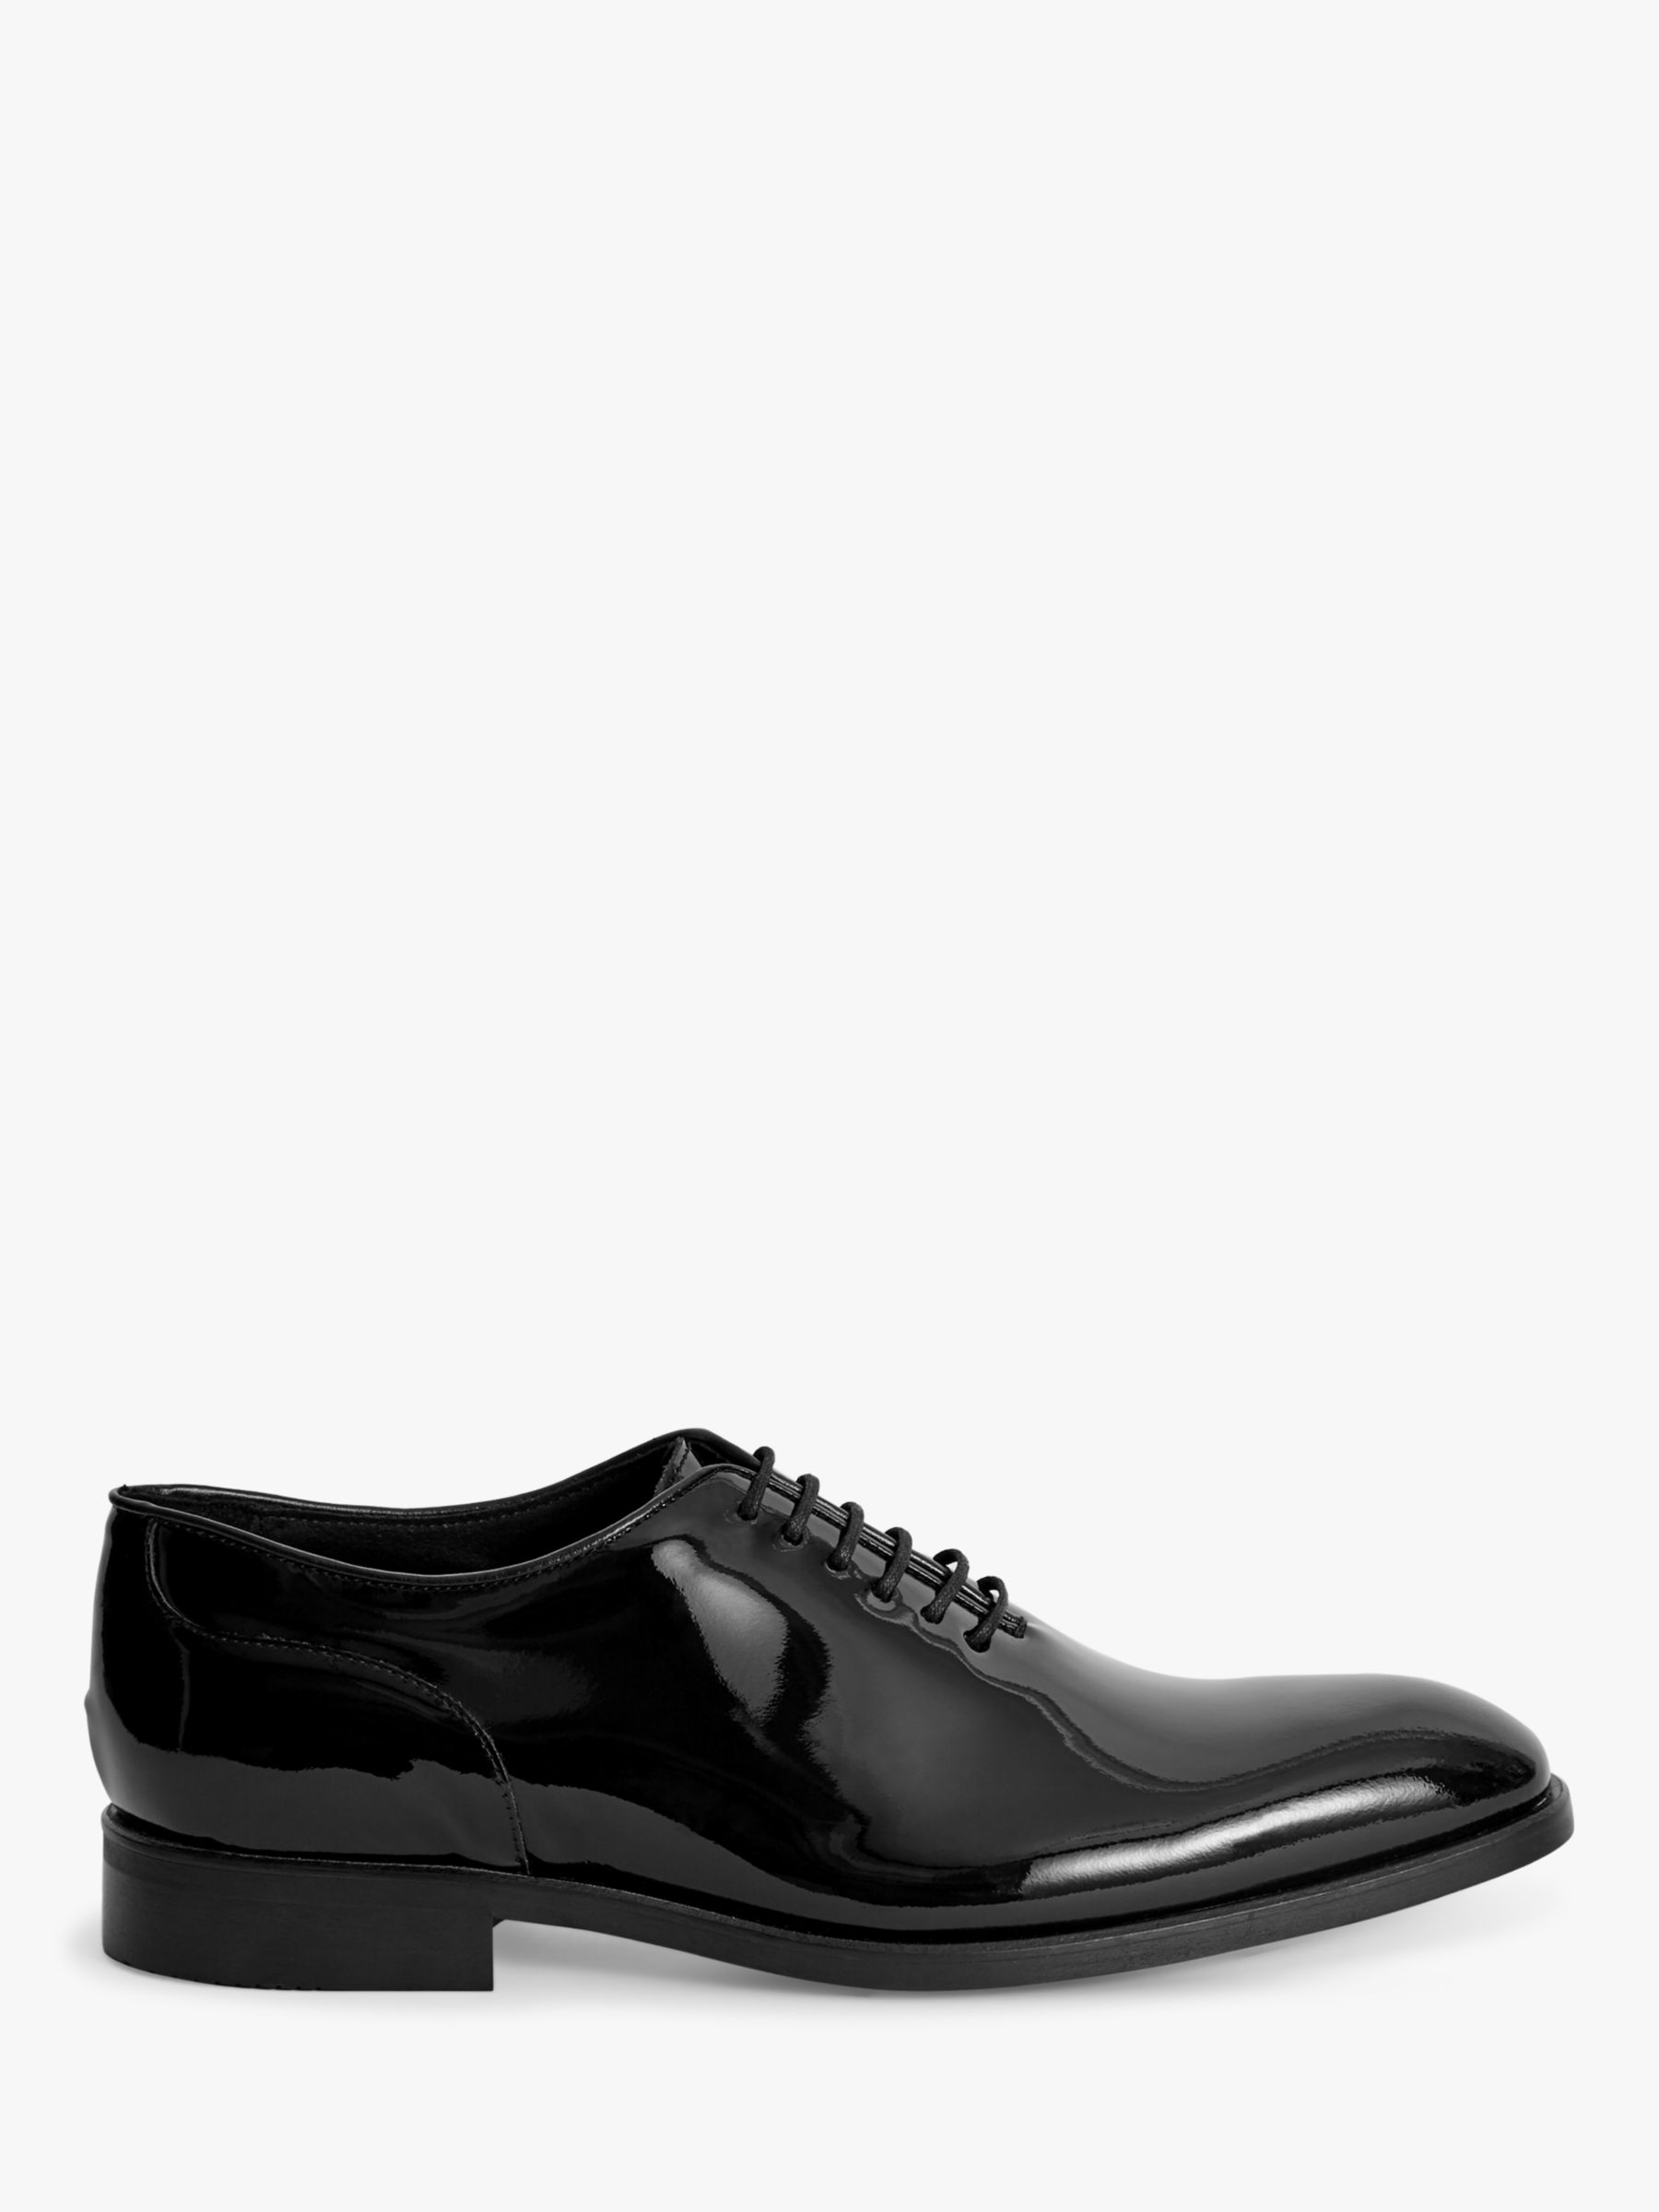 Reiss Bay Patent Leather Whole Cut Shoes, Black